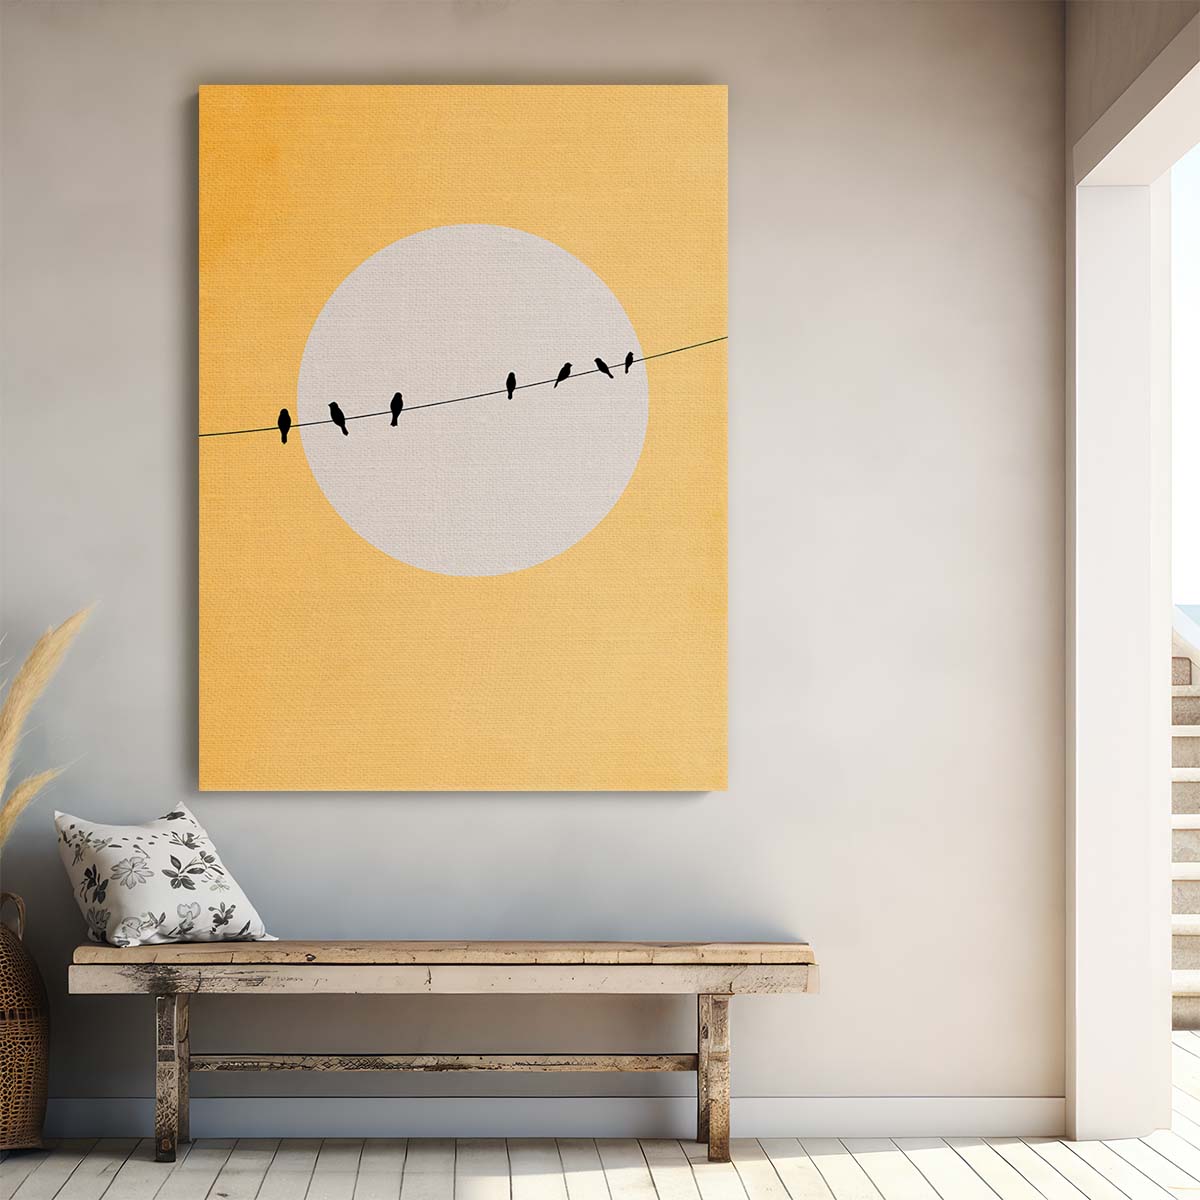 Kubistika's Colourful Bird Silhouette Illustration on Bright Yellow Background by Luxuriance Designs, made in USA